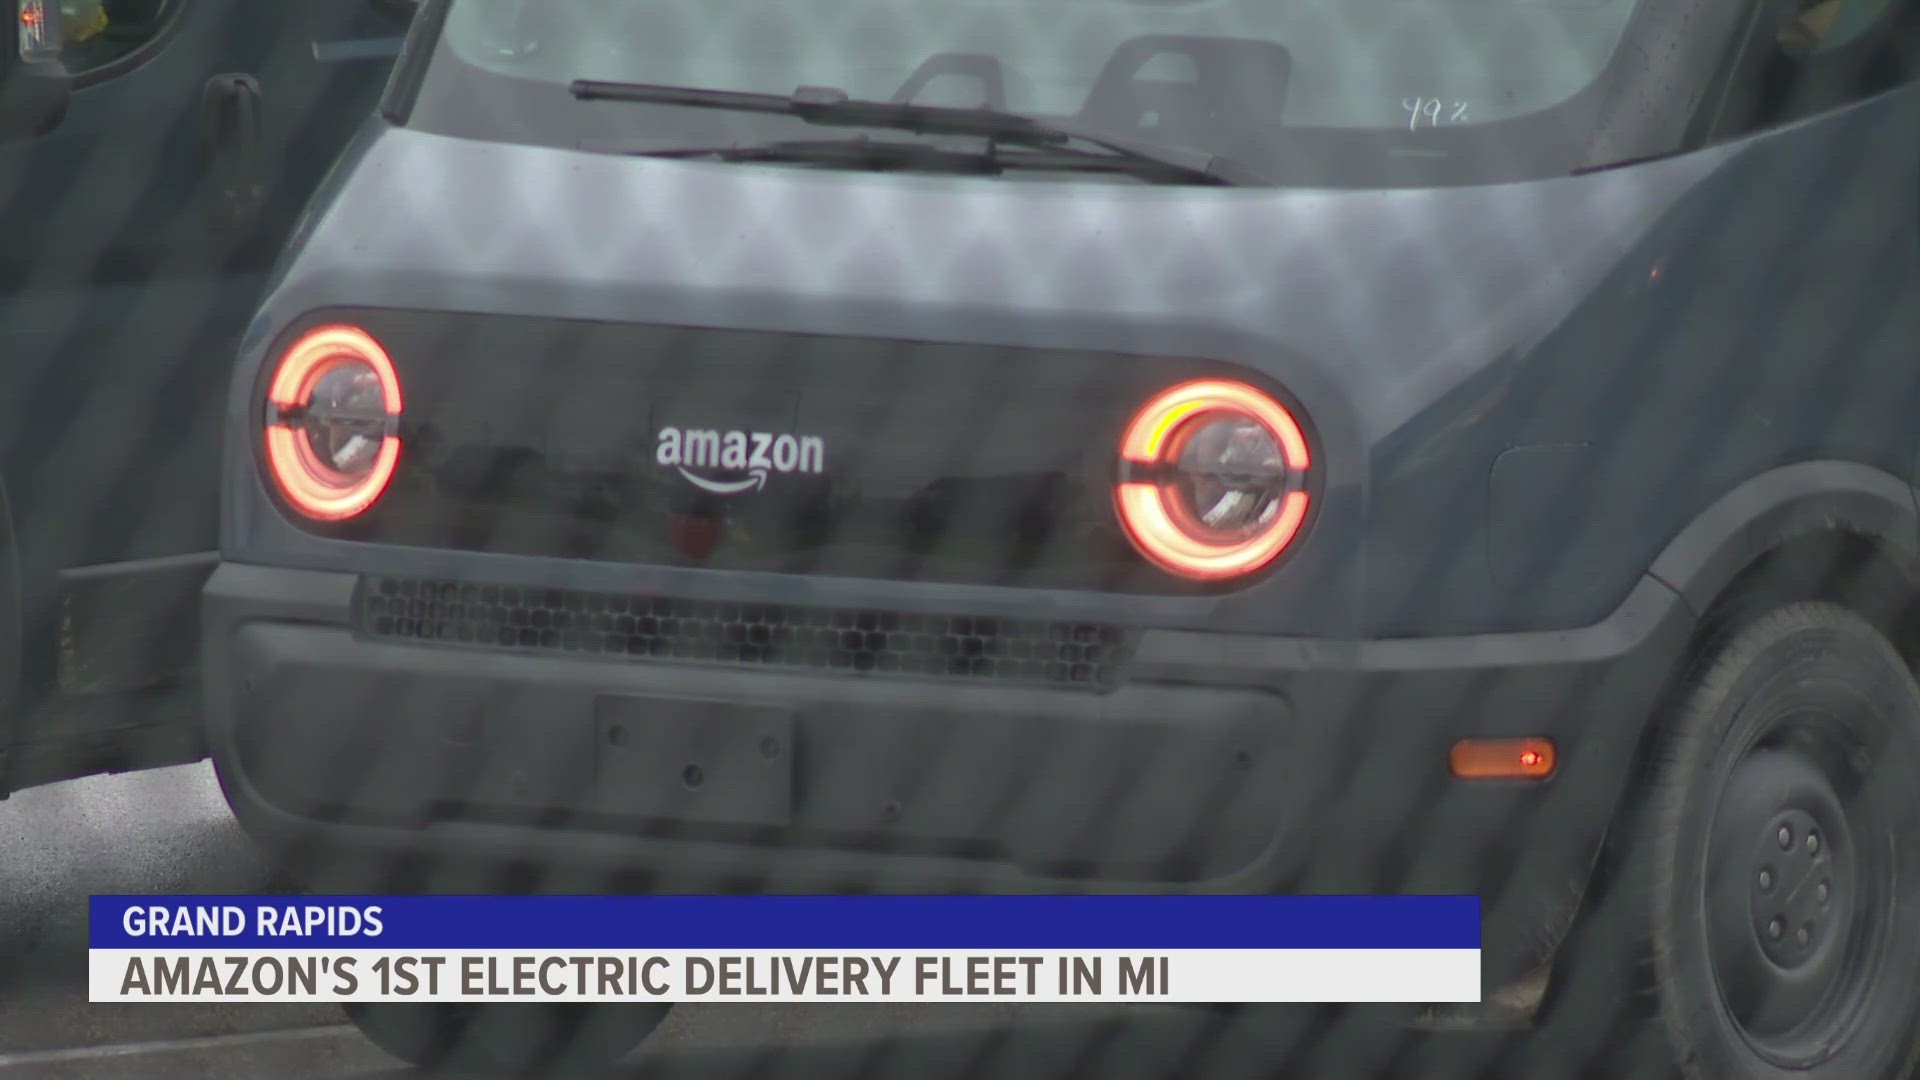 Grand Rapids is the first city in the state to welcome the new Amazon electric delivery vehicles.